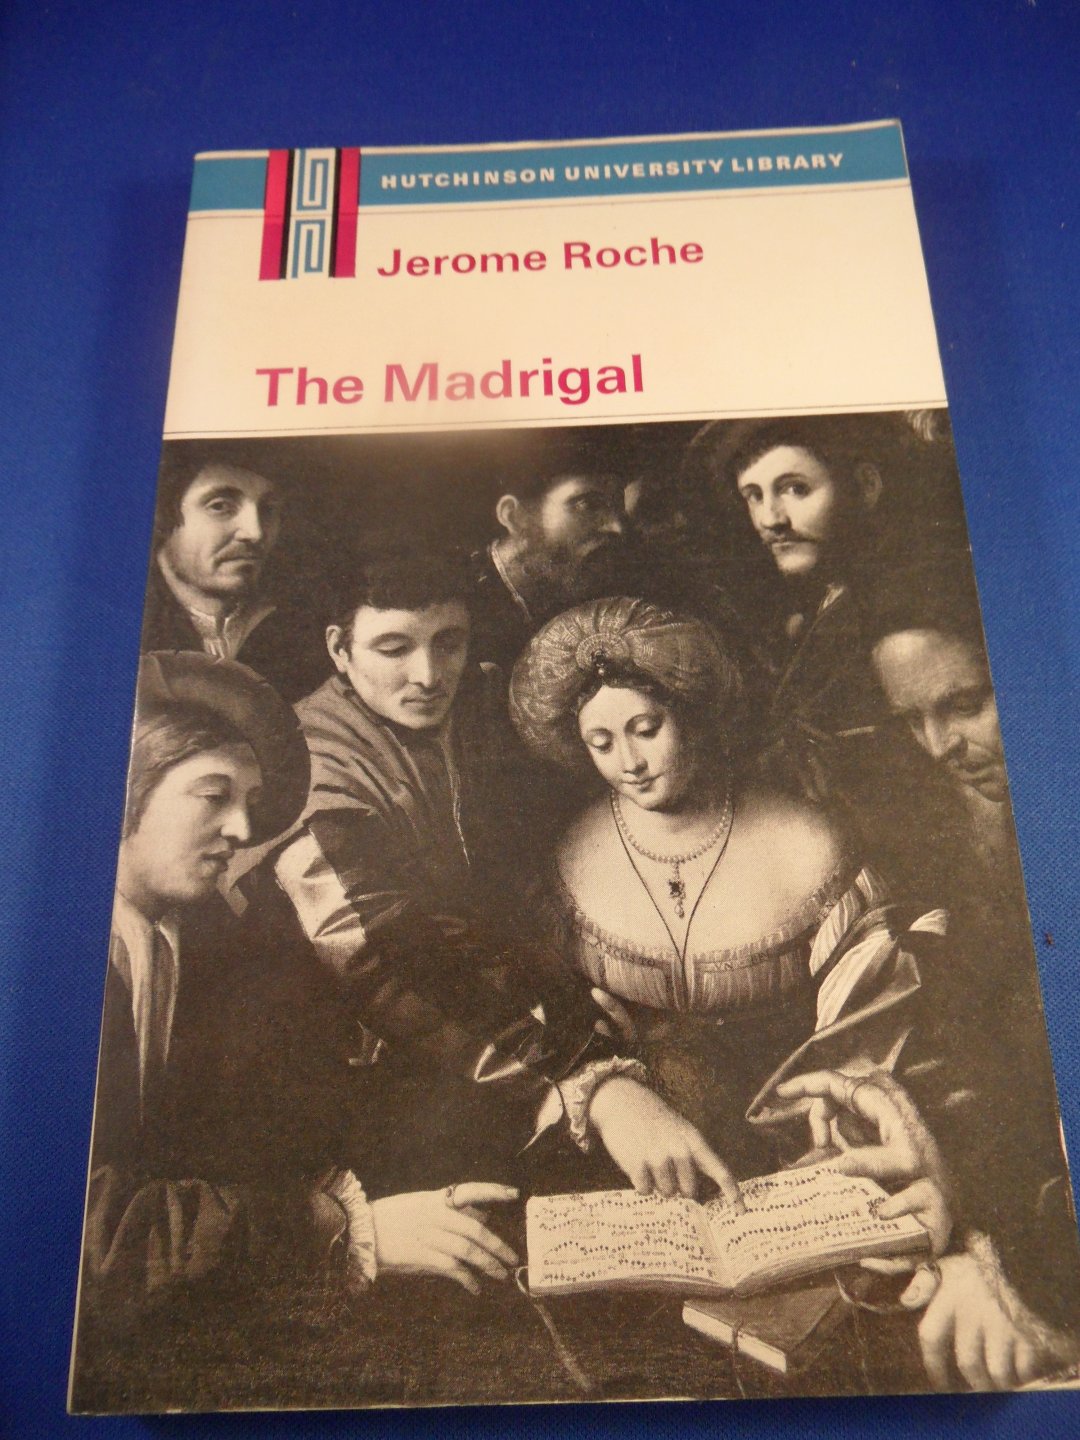 Roche, Jerome - The Madrigal